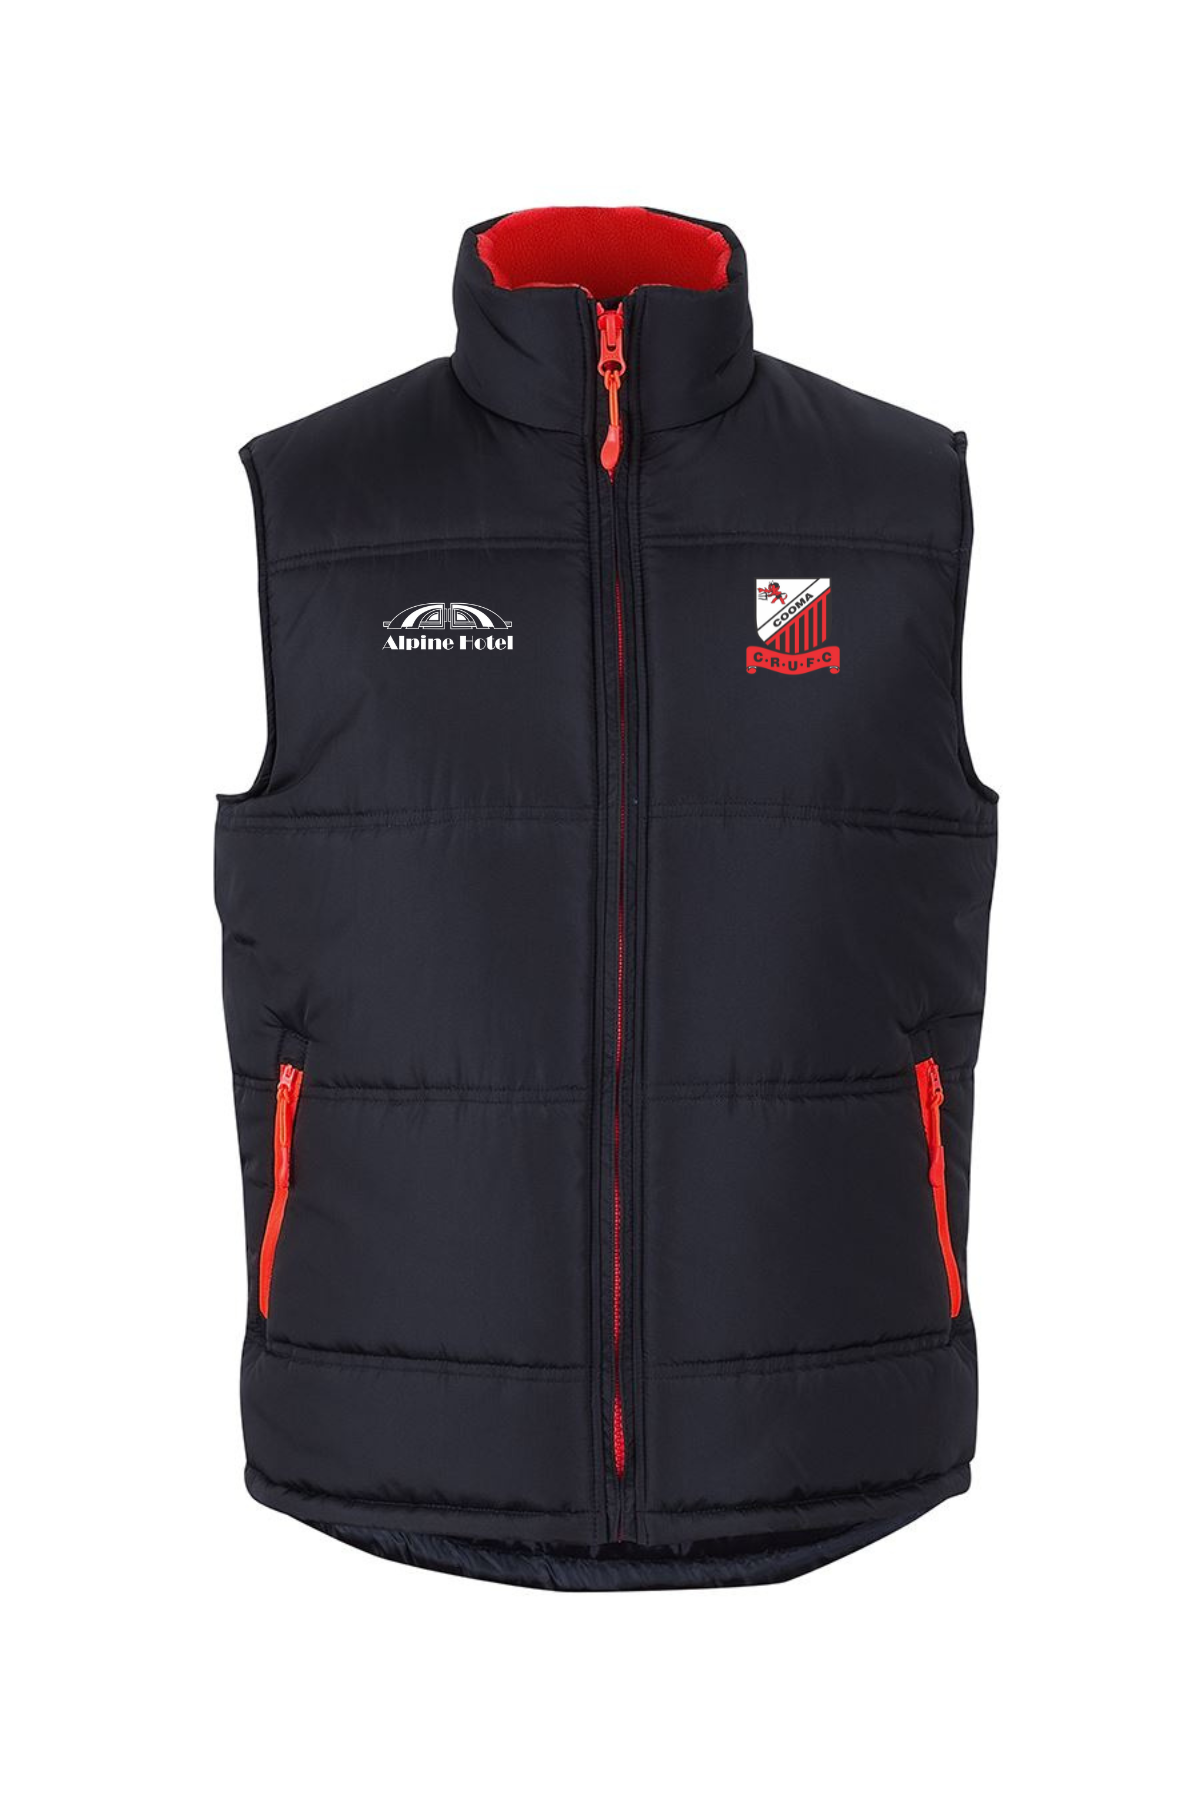 Cooma Rugby Red Devils Puffer Vest